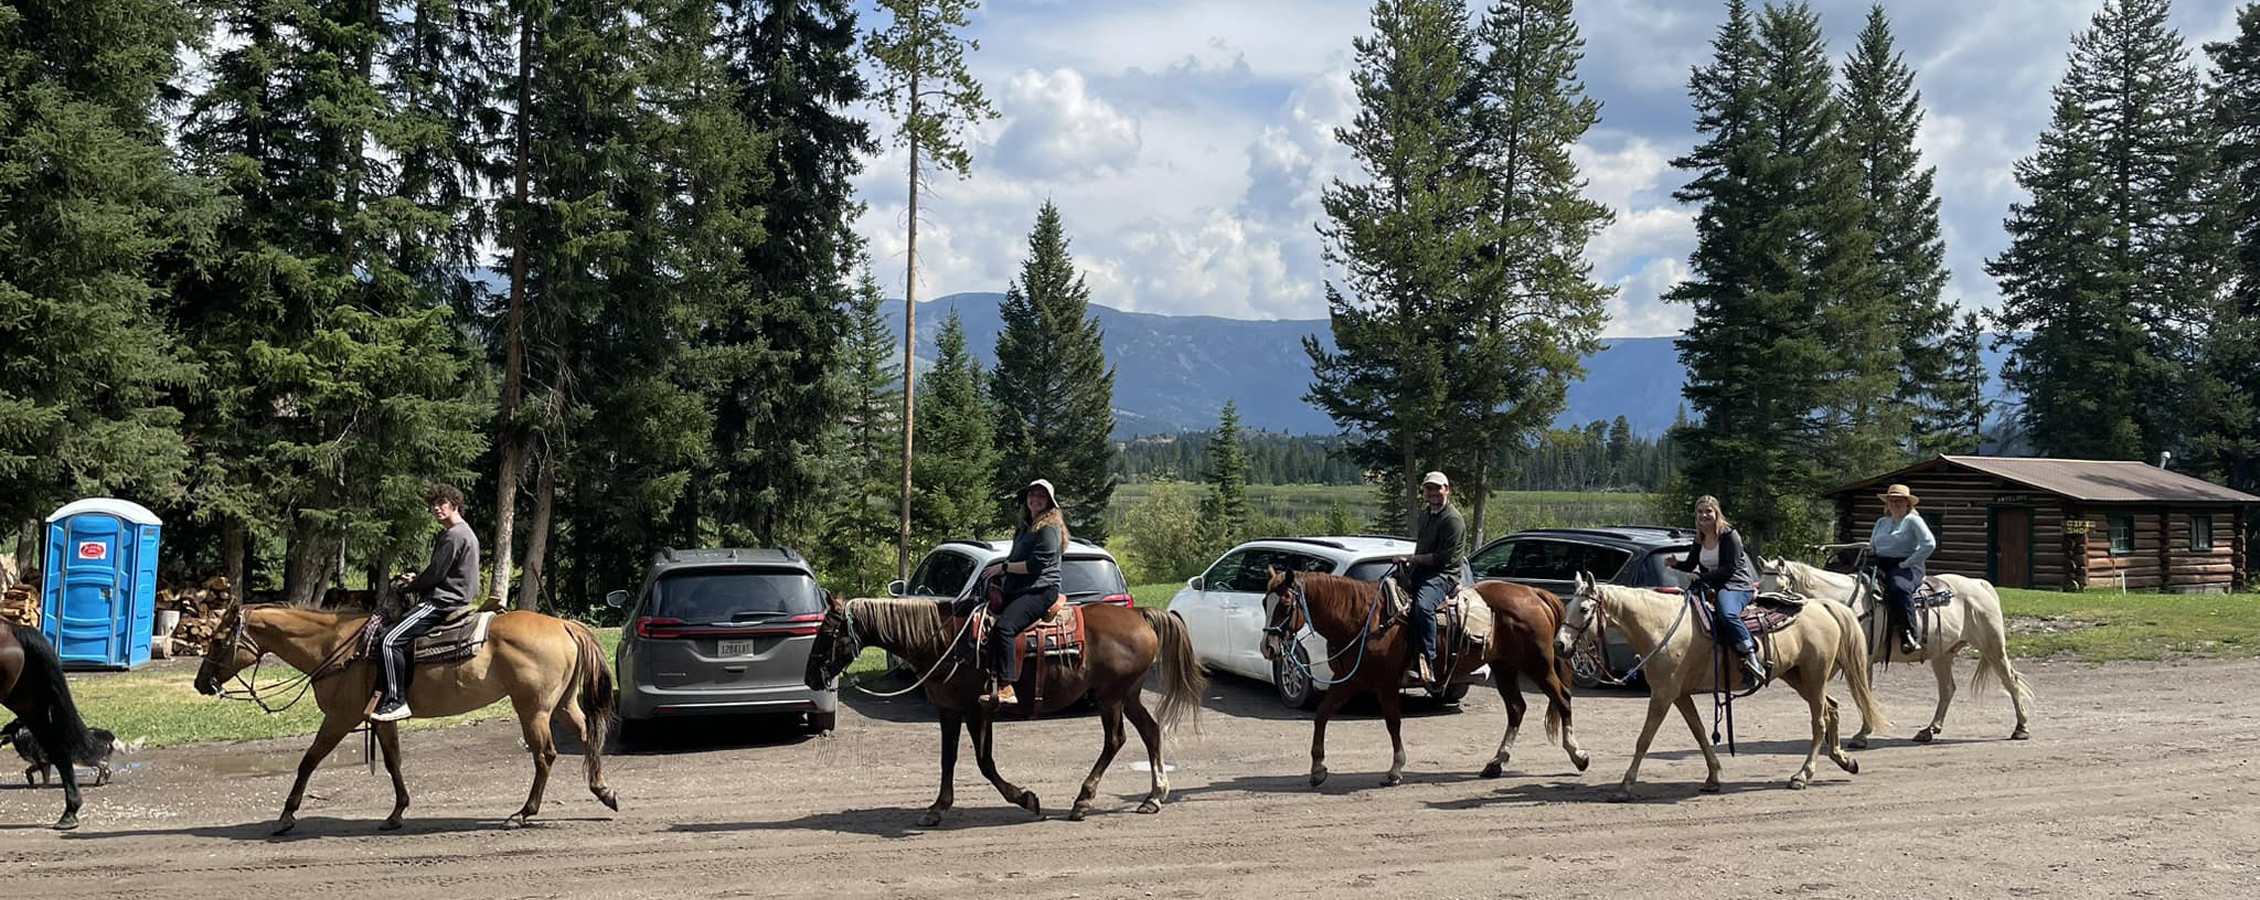 A group of people ride horses amidst mountains and evergreen trees.